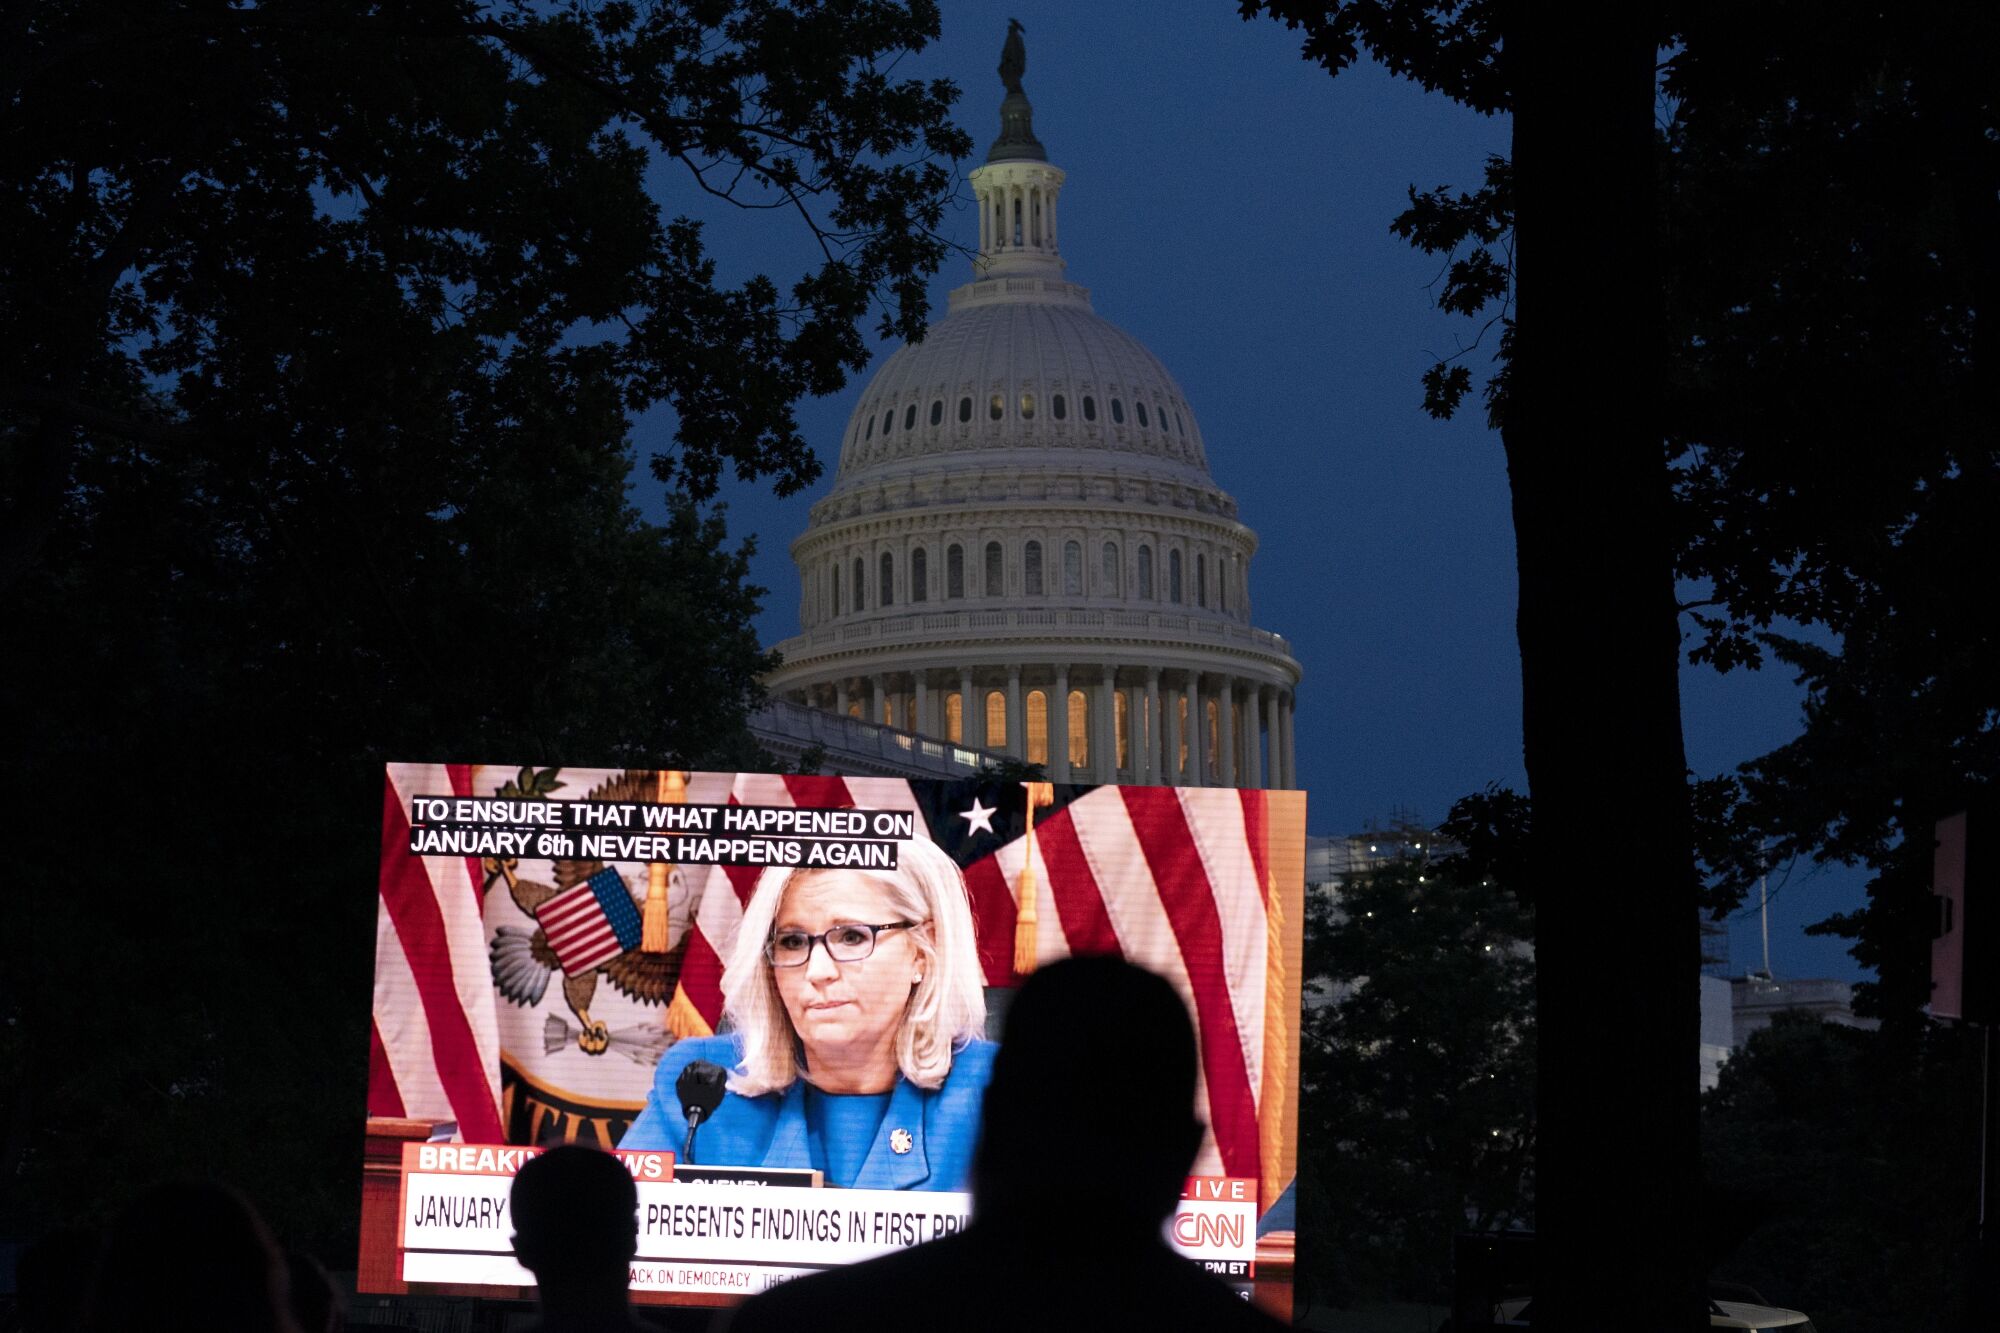 Rep. Liz Cheney appears on a screen as people watch the Jan. 6 hearings near the Capitol